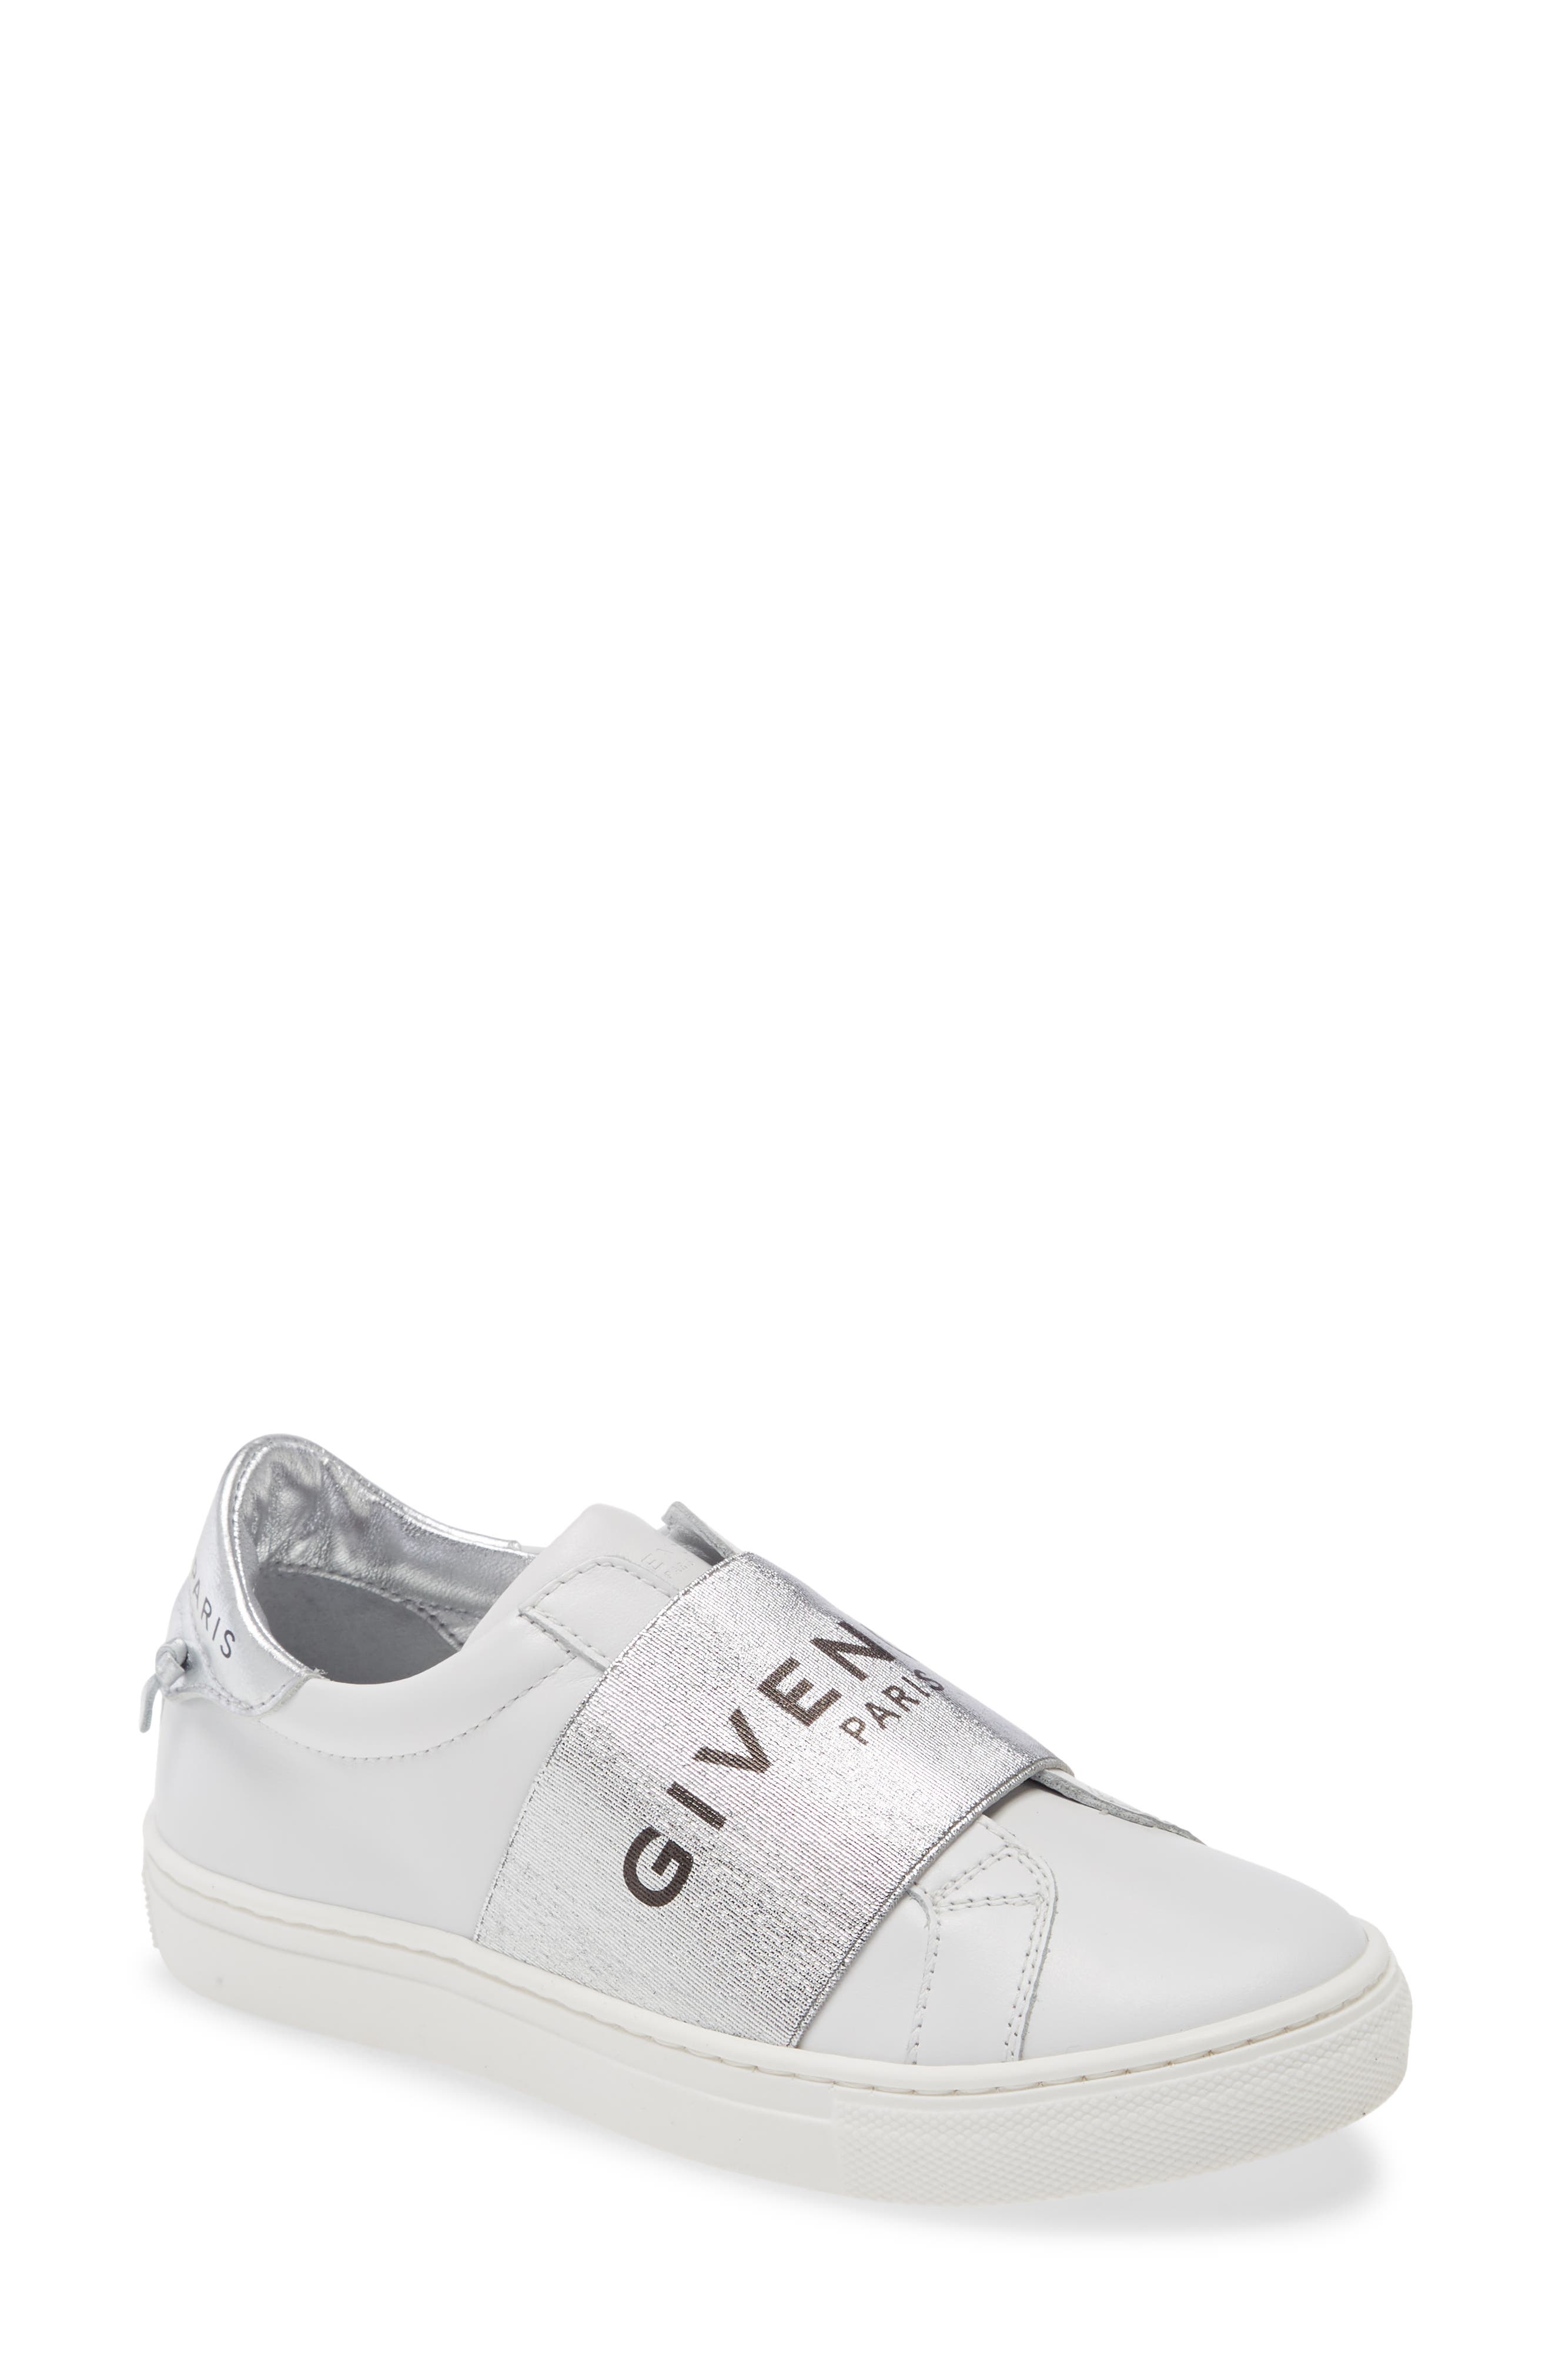 Boys' Givenchy Shoes